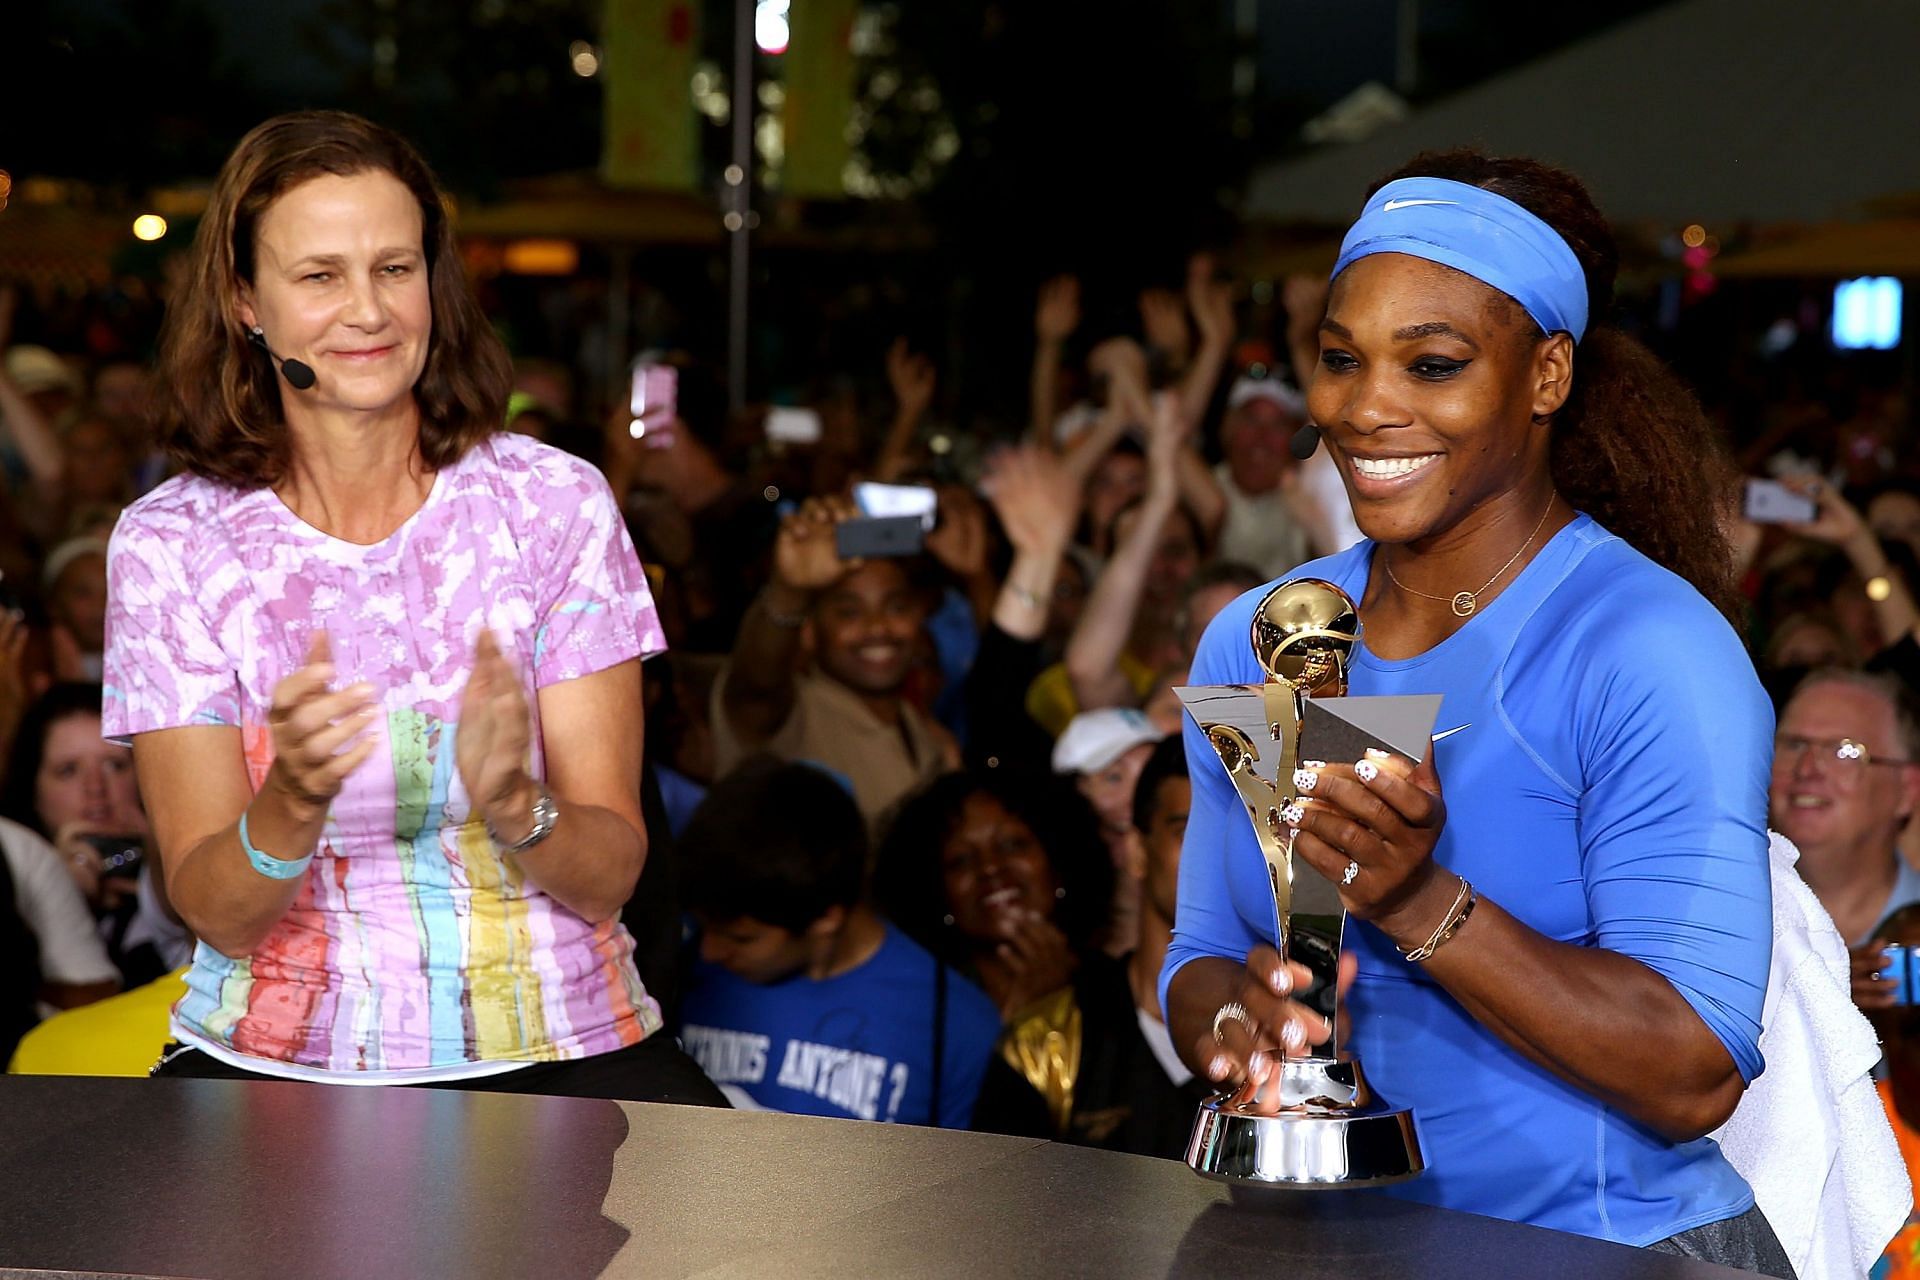 Pam Shriver (left) with Serena Williams (right) during the 2013 edition of the Cincinnati Open